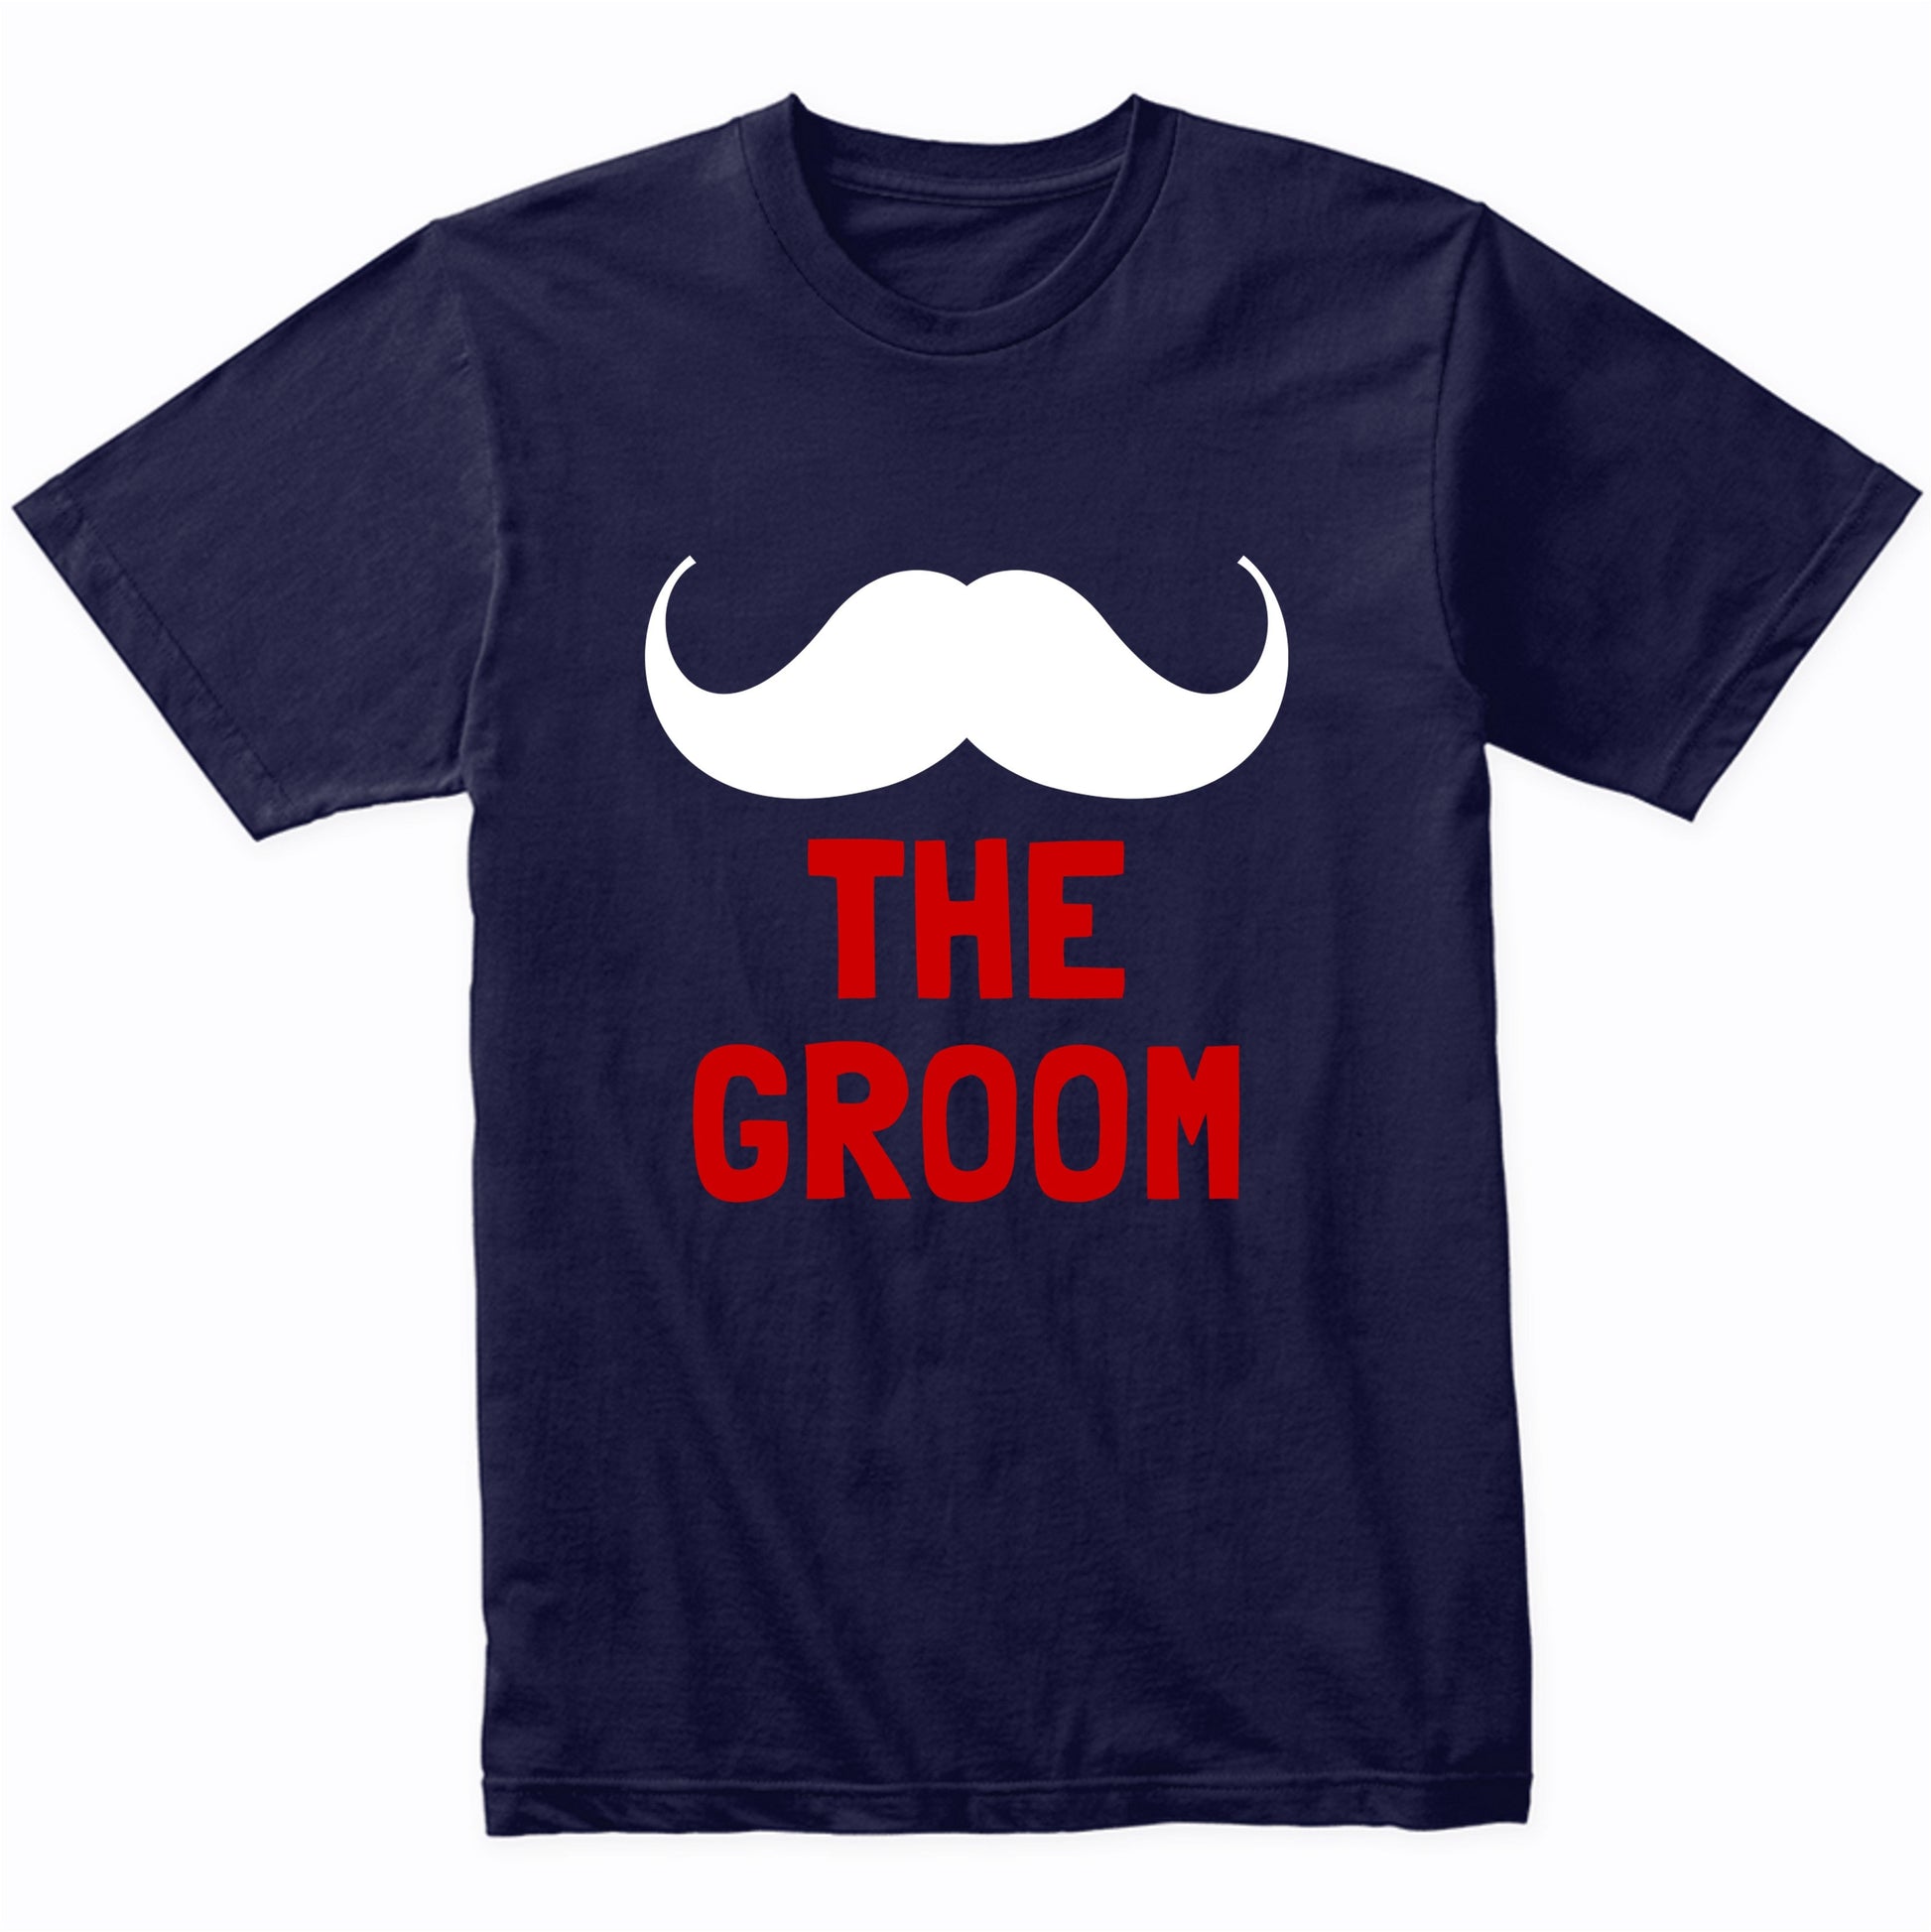 The Groom Shirt - Bachelor Party Wedding Party Mustache T-Shirt